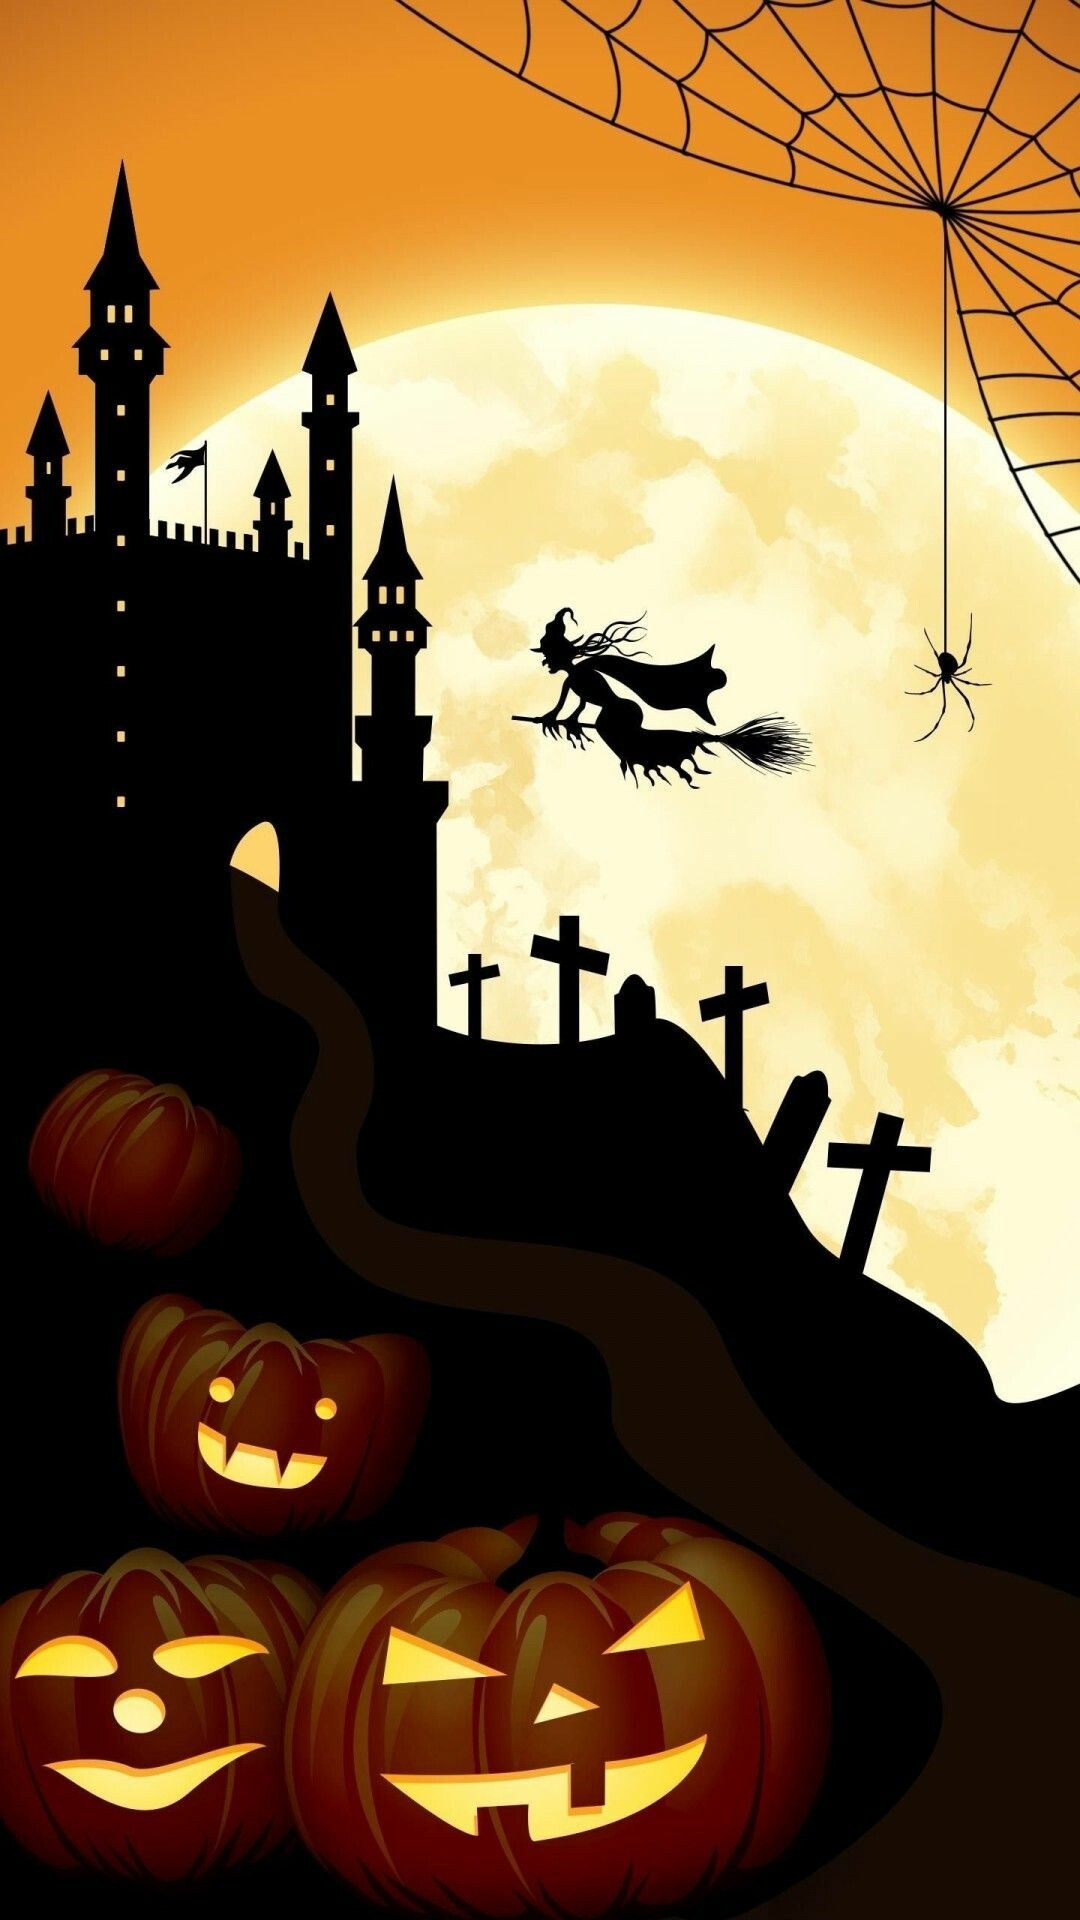 Halloween Wallpaper: HD, 4K, 5K for PC and Mobile. Download free image for iPhone, Android